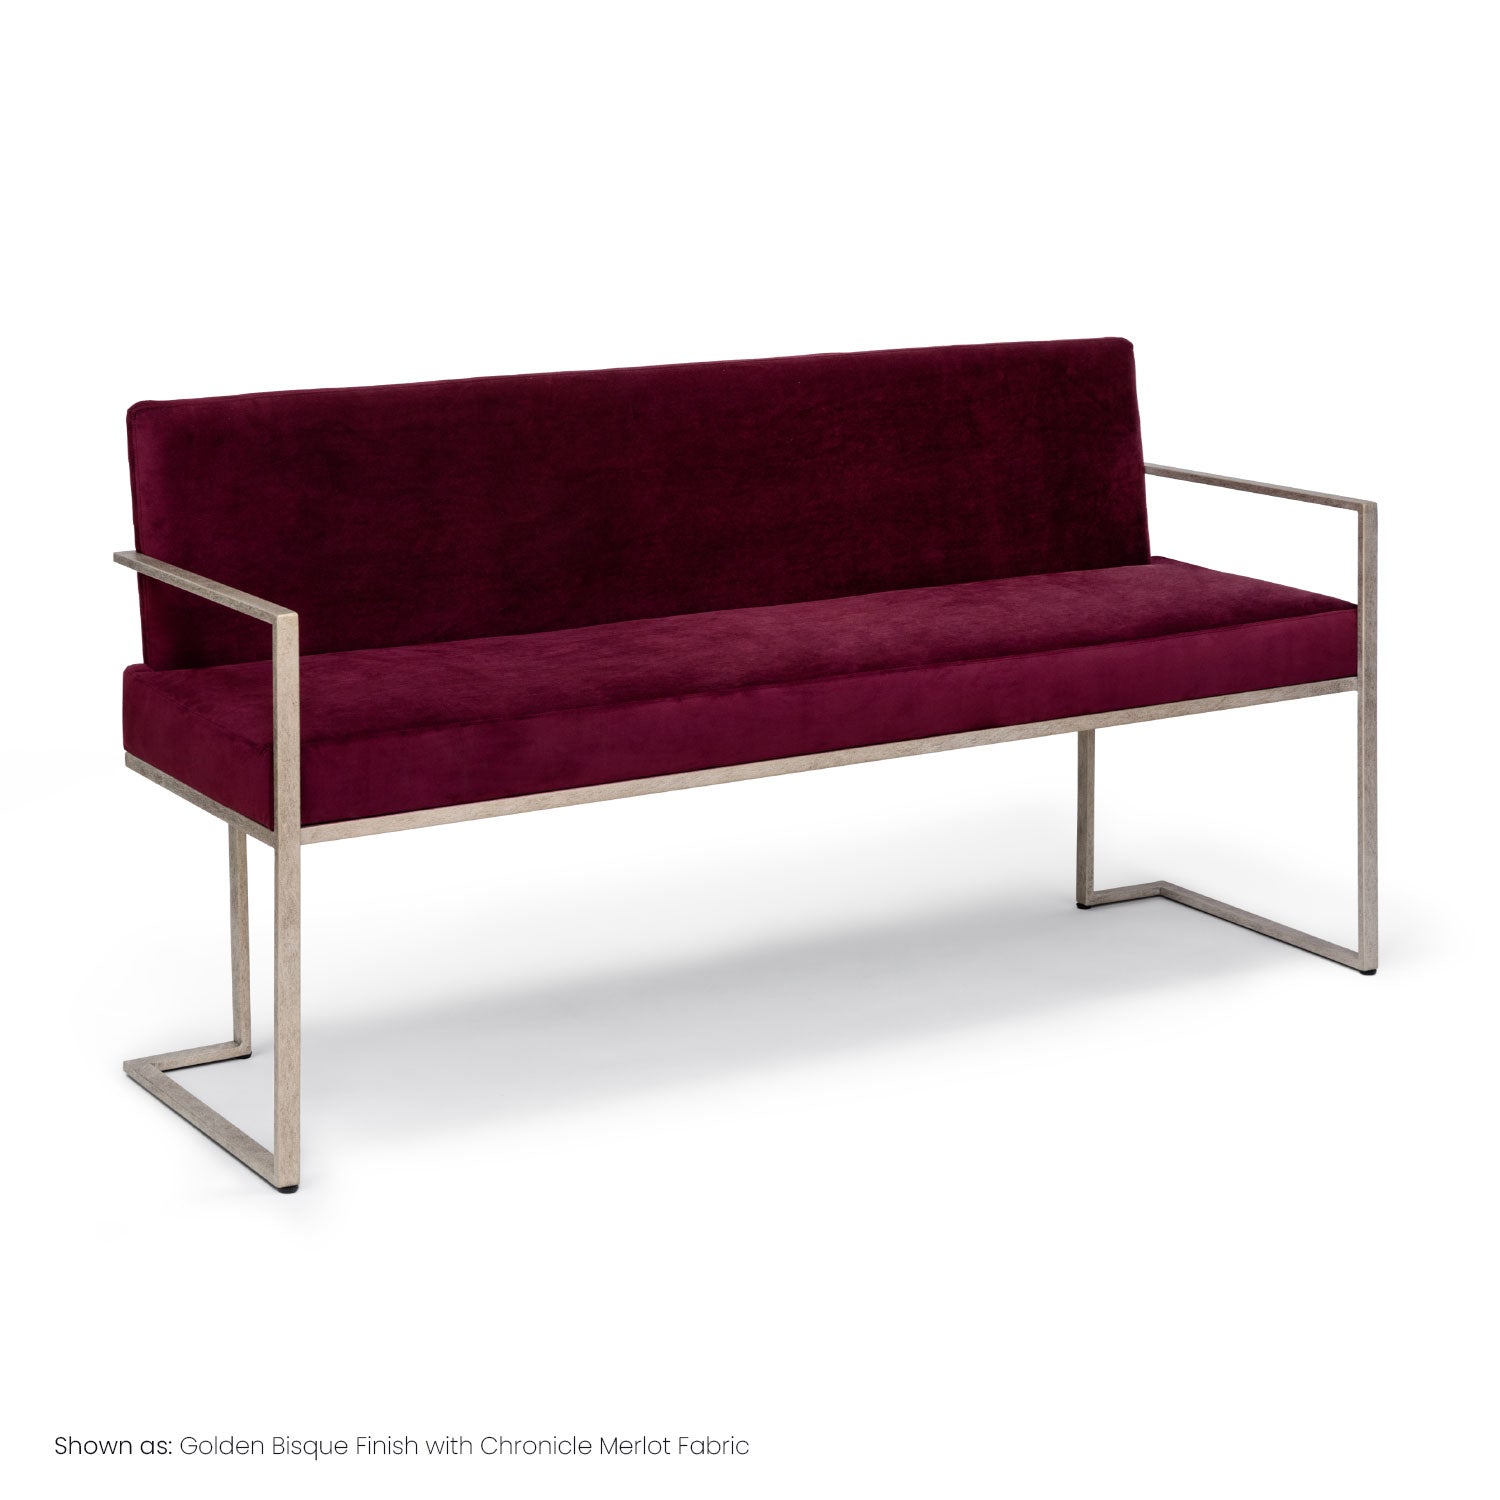 Wesley Allen Marzan Bench featured in a Golden Bisque Finish and Upholstered with Premium Chronicle Merlot Fabric.